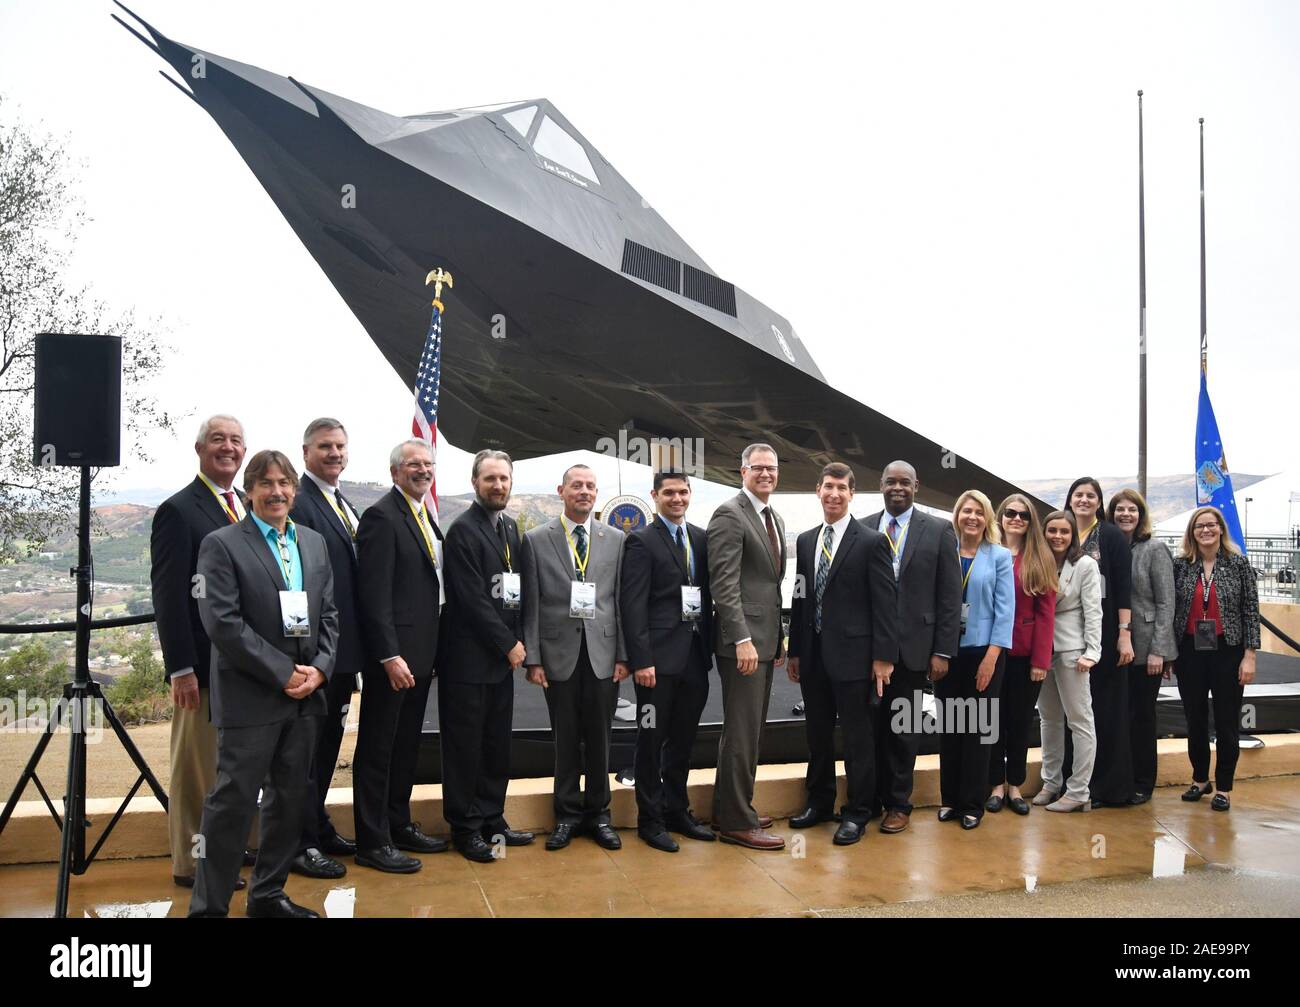 Lockheed officials pose together with the new F-117 Nighthawk Stealth Fighter exhibit at the Ronald Reagan Presidential Library and Museum now open Saturday. Simi Valley, CA./USA 2019. Credit: Gene Blevins/ZUMA Wire/Alamy Live News Stock Photo